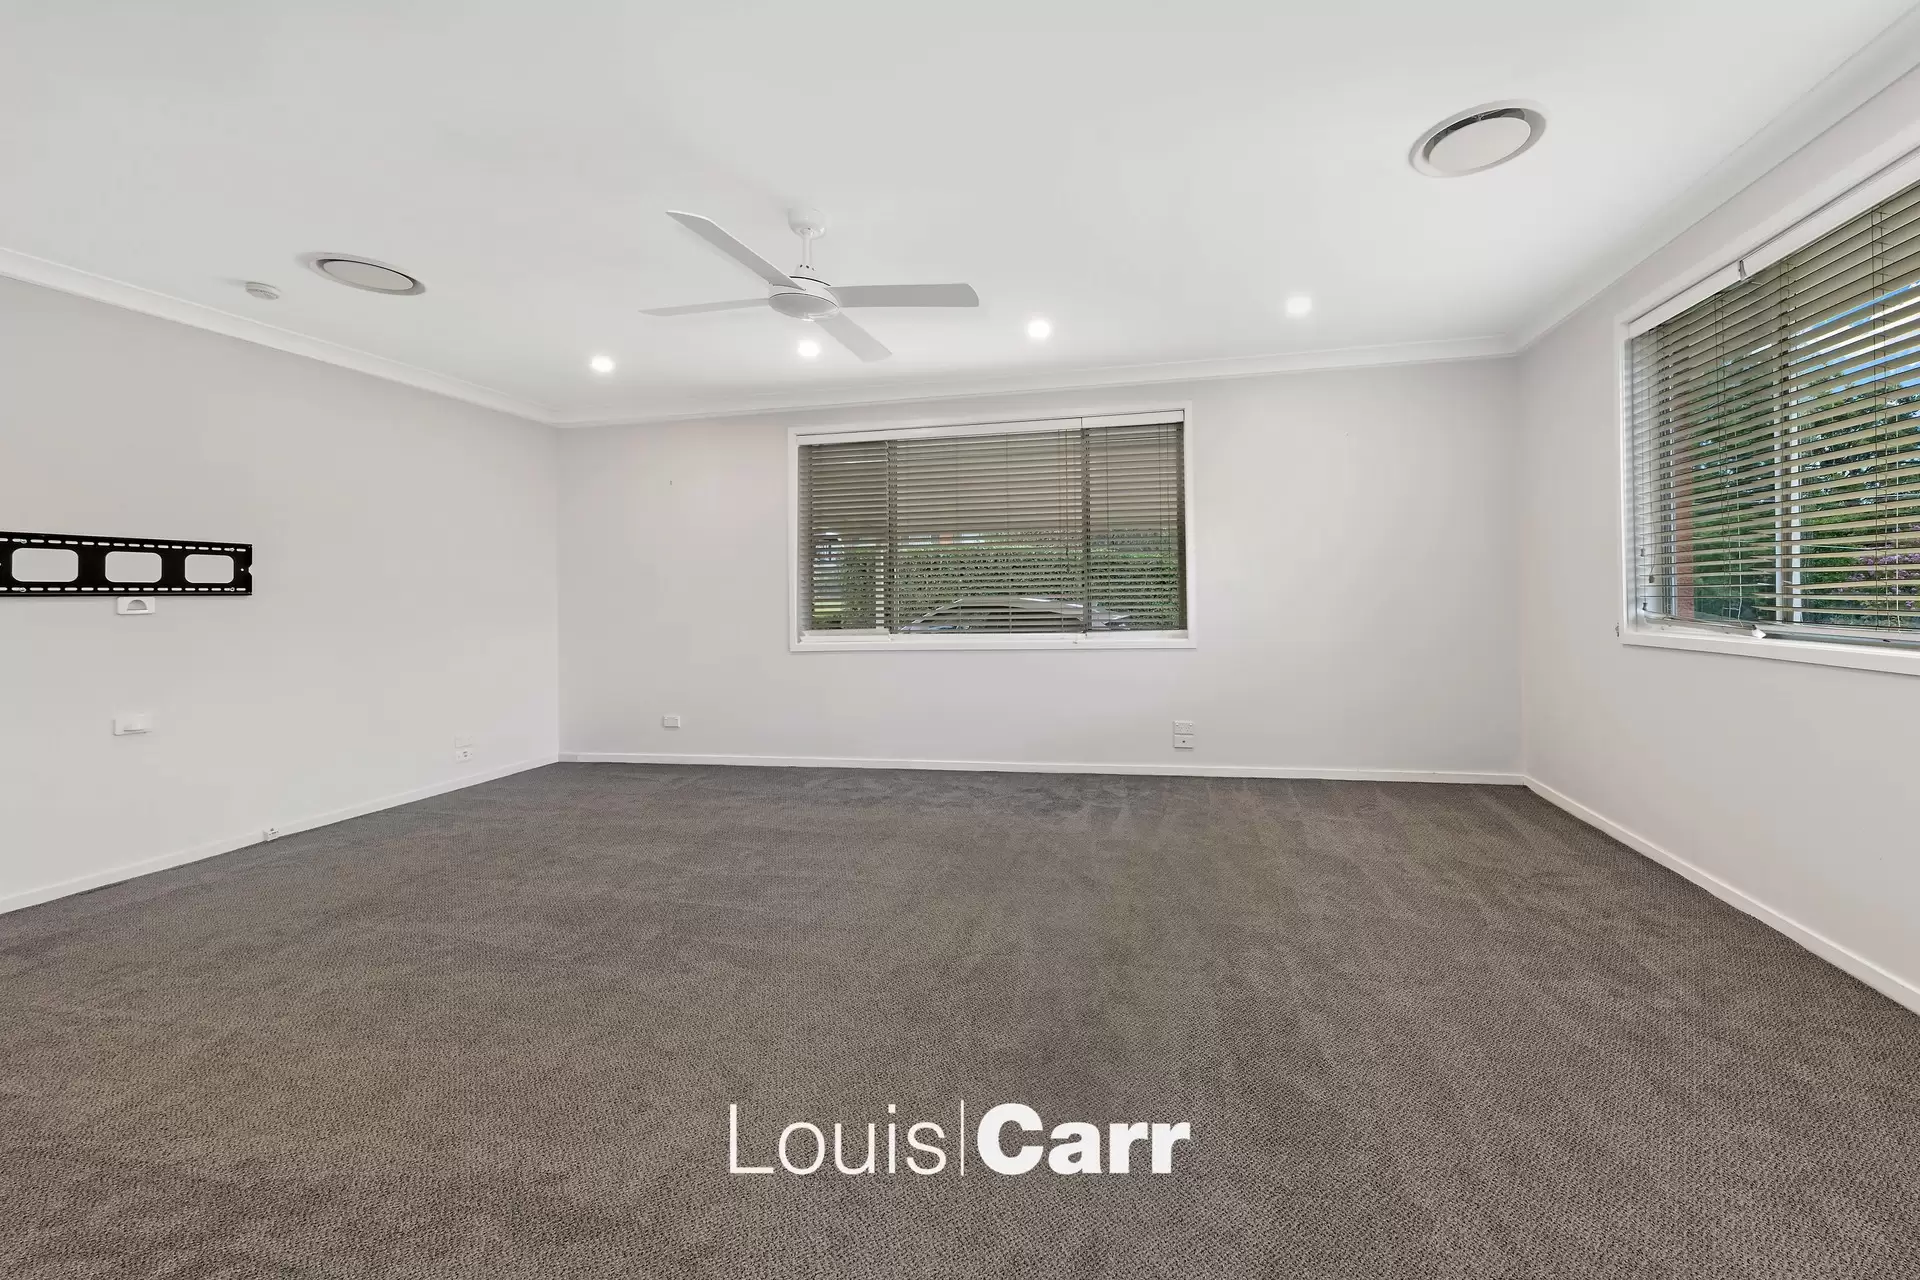 Photo #10: 24 Waninga Road, Hornsby Heights - Leased by Louis Carr Real Estate